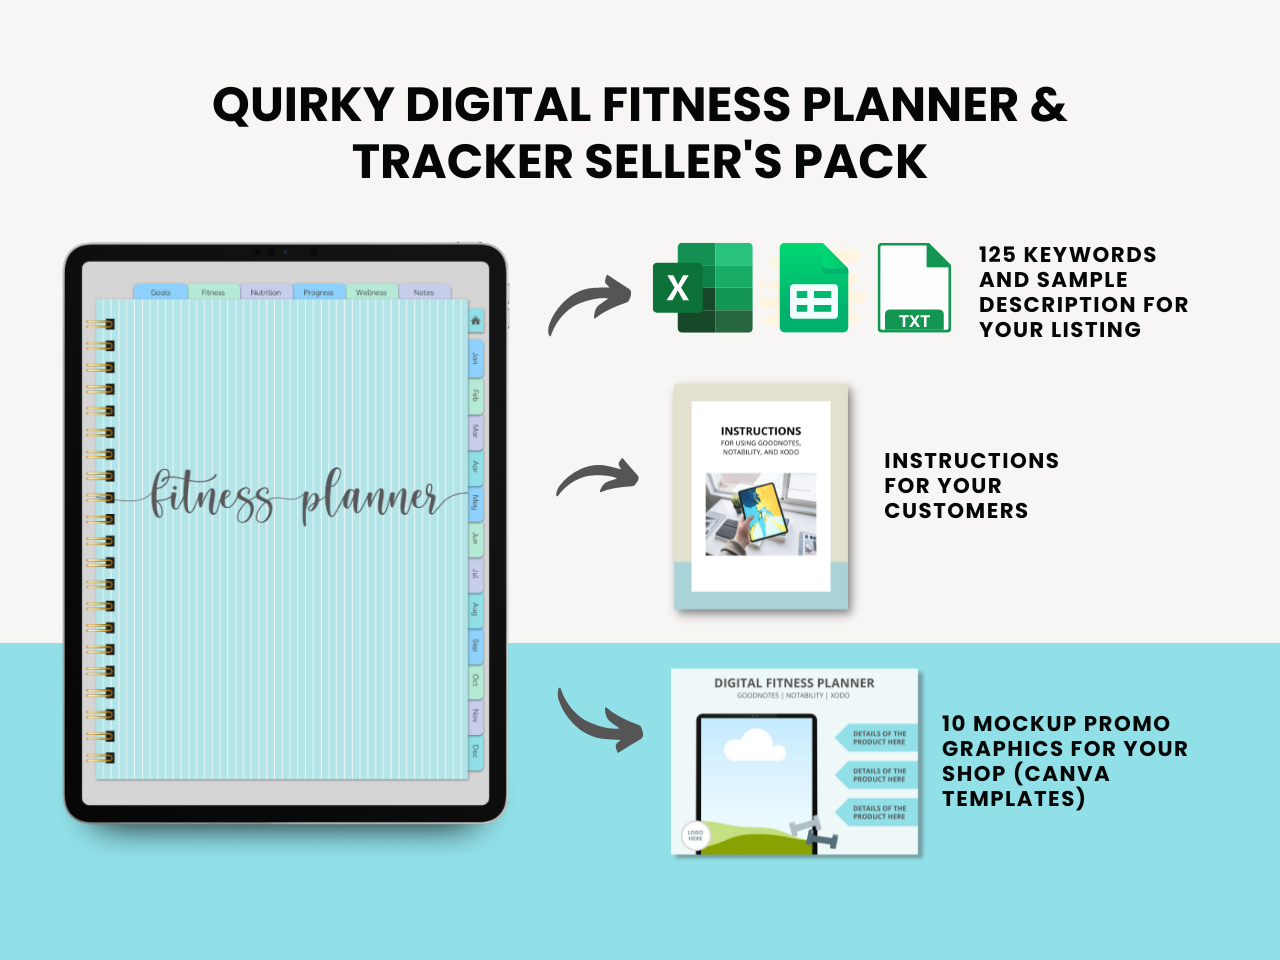 Quirky Digital Fitness Planner sellers pack graphic